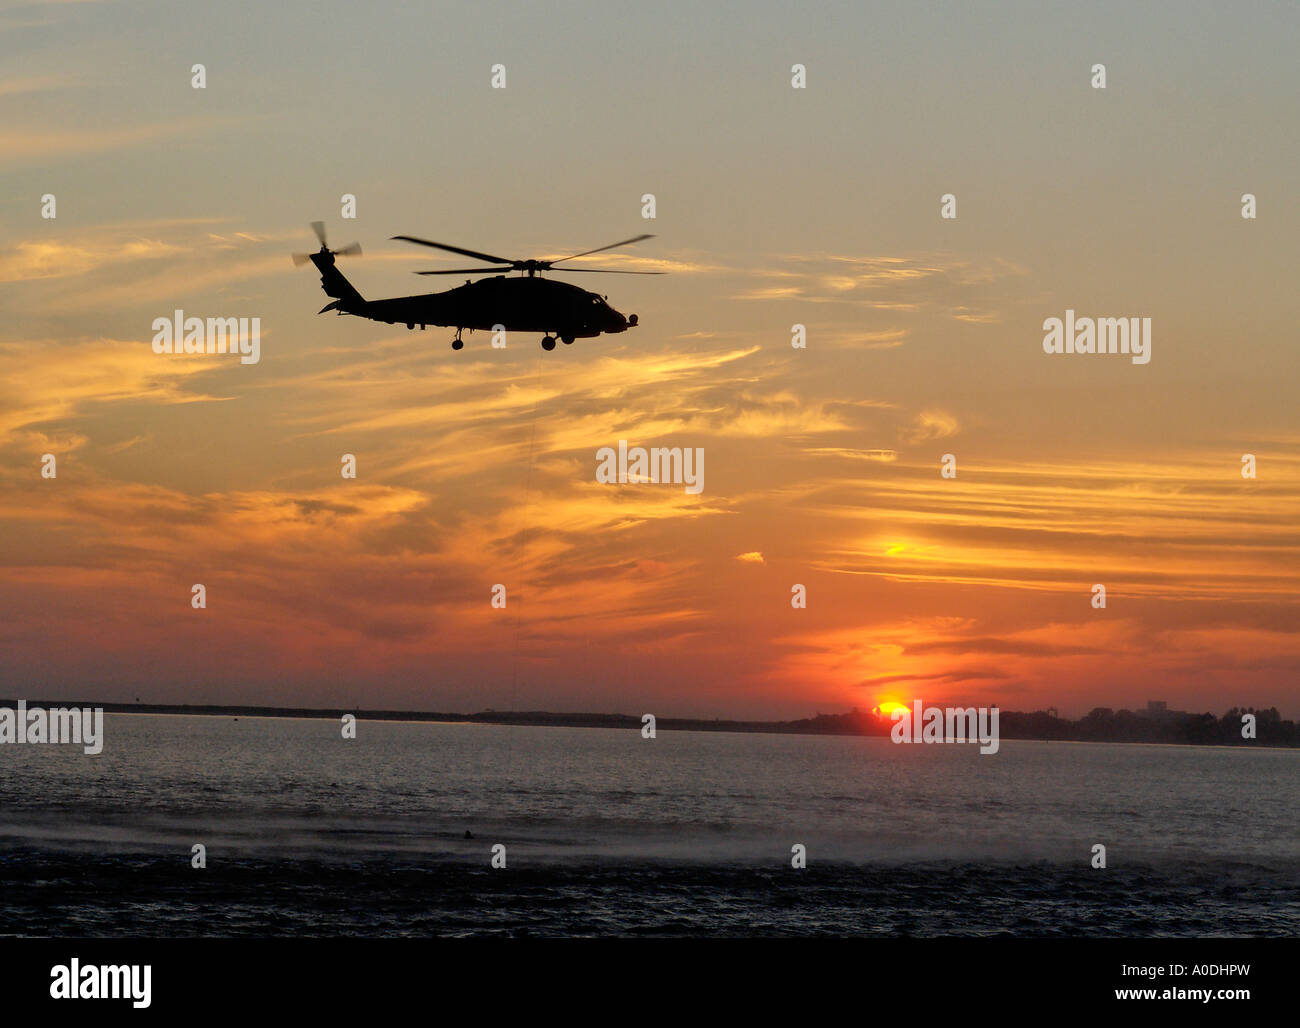 A Military Exercise Being Undertaken at Sunset in San Diego Harbour, California, Photographed in Landscape View Stock Photo